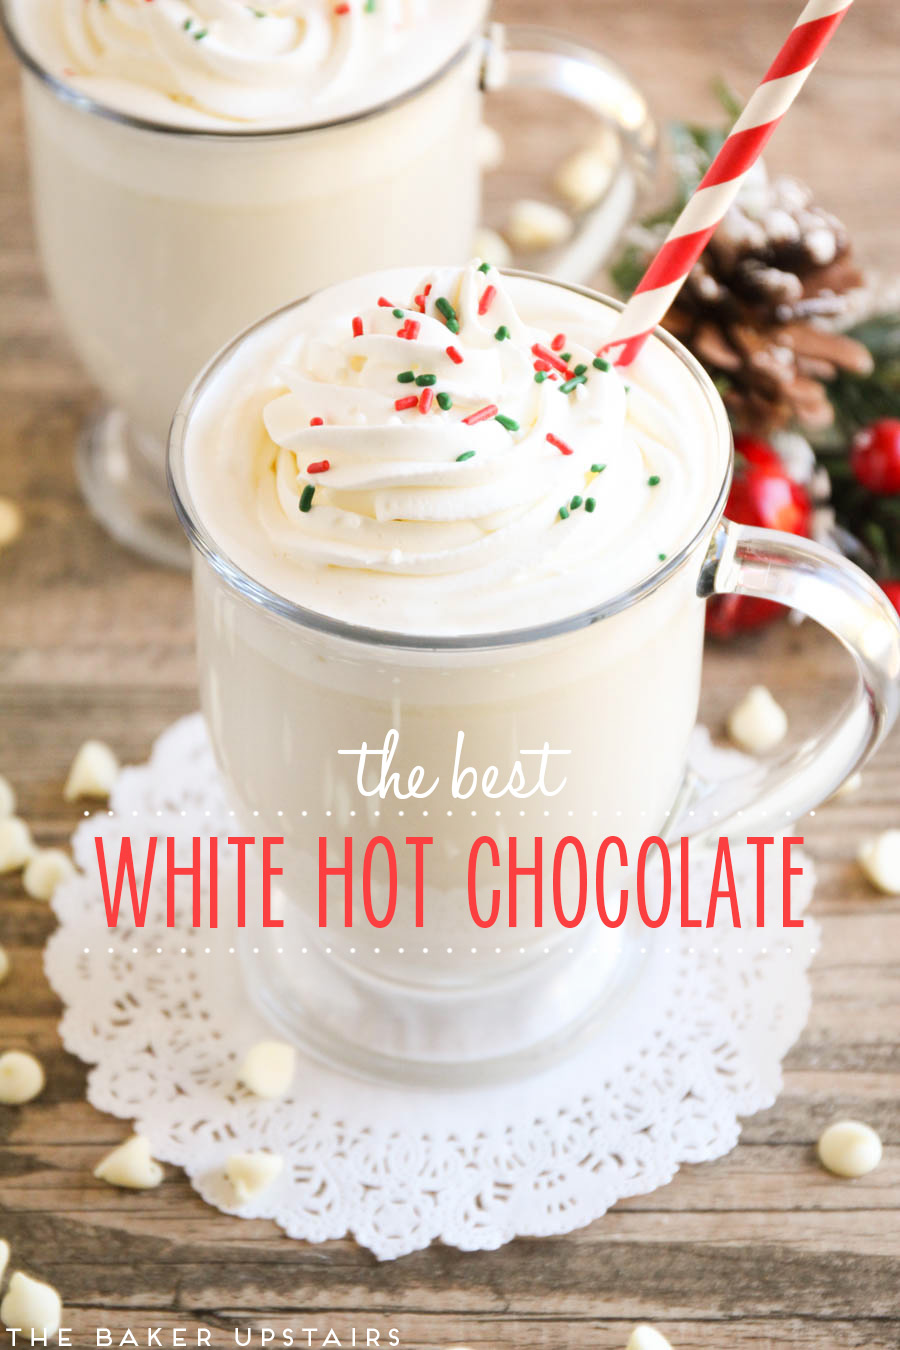 This homemade white hot chocolate is so velvety smooth, and so rich and delicious! It's the perfect holiday treat!